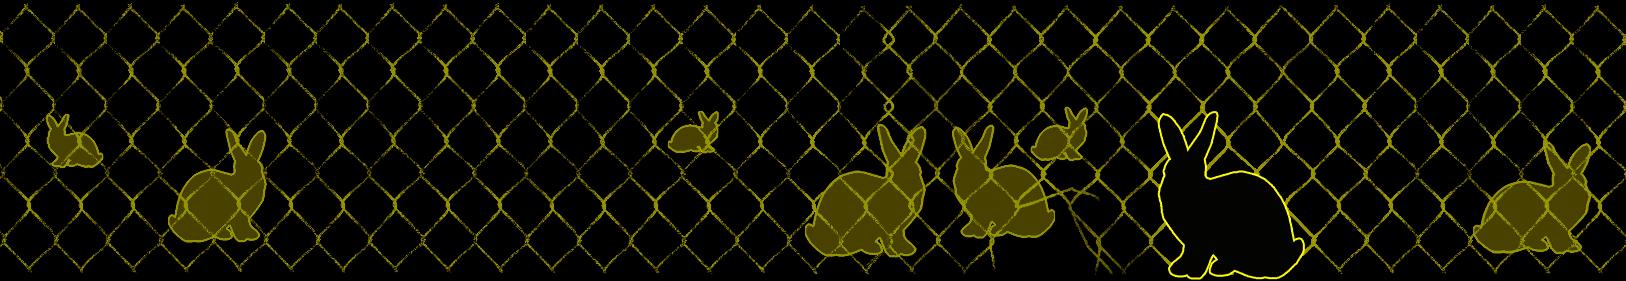 rabbitprooffence_by_10.gif